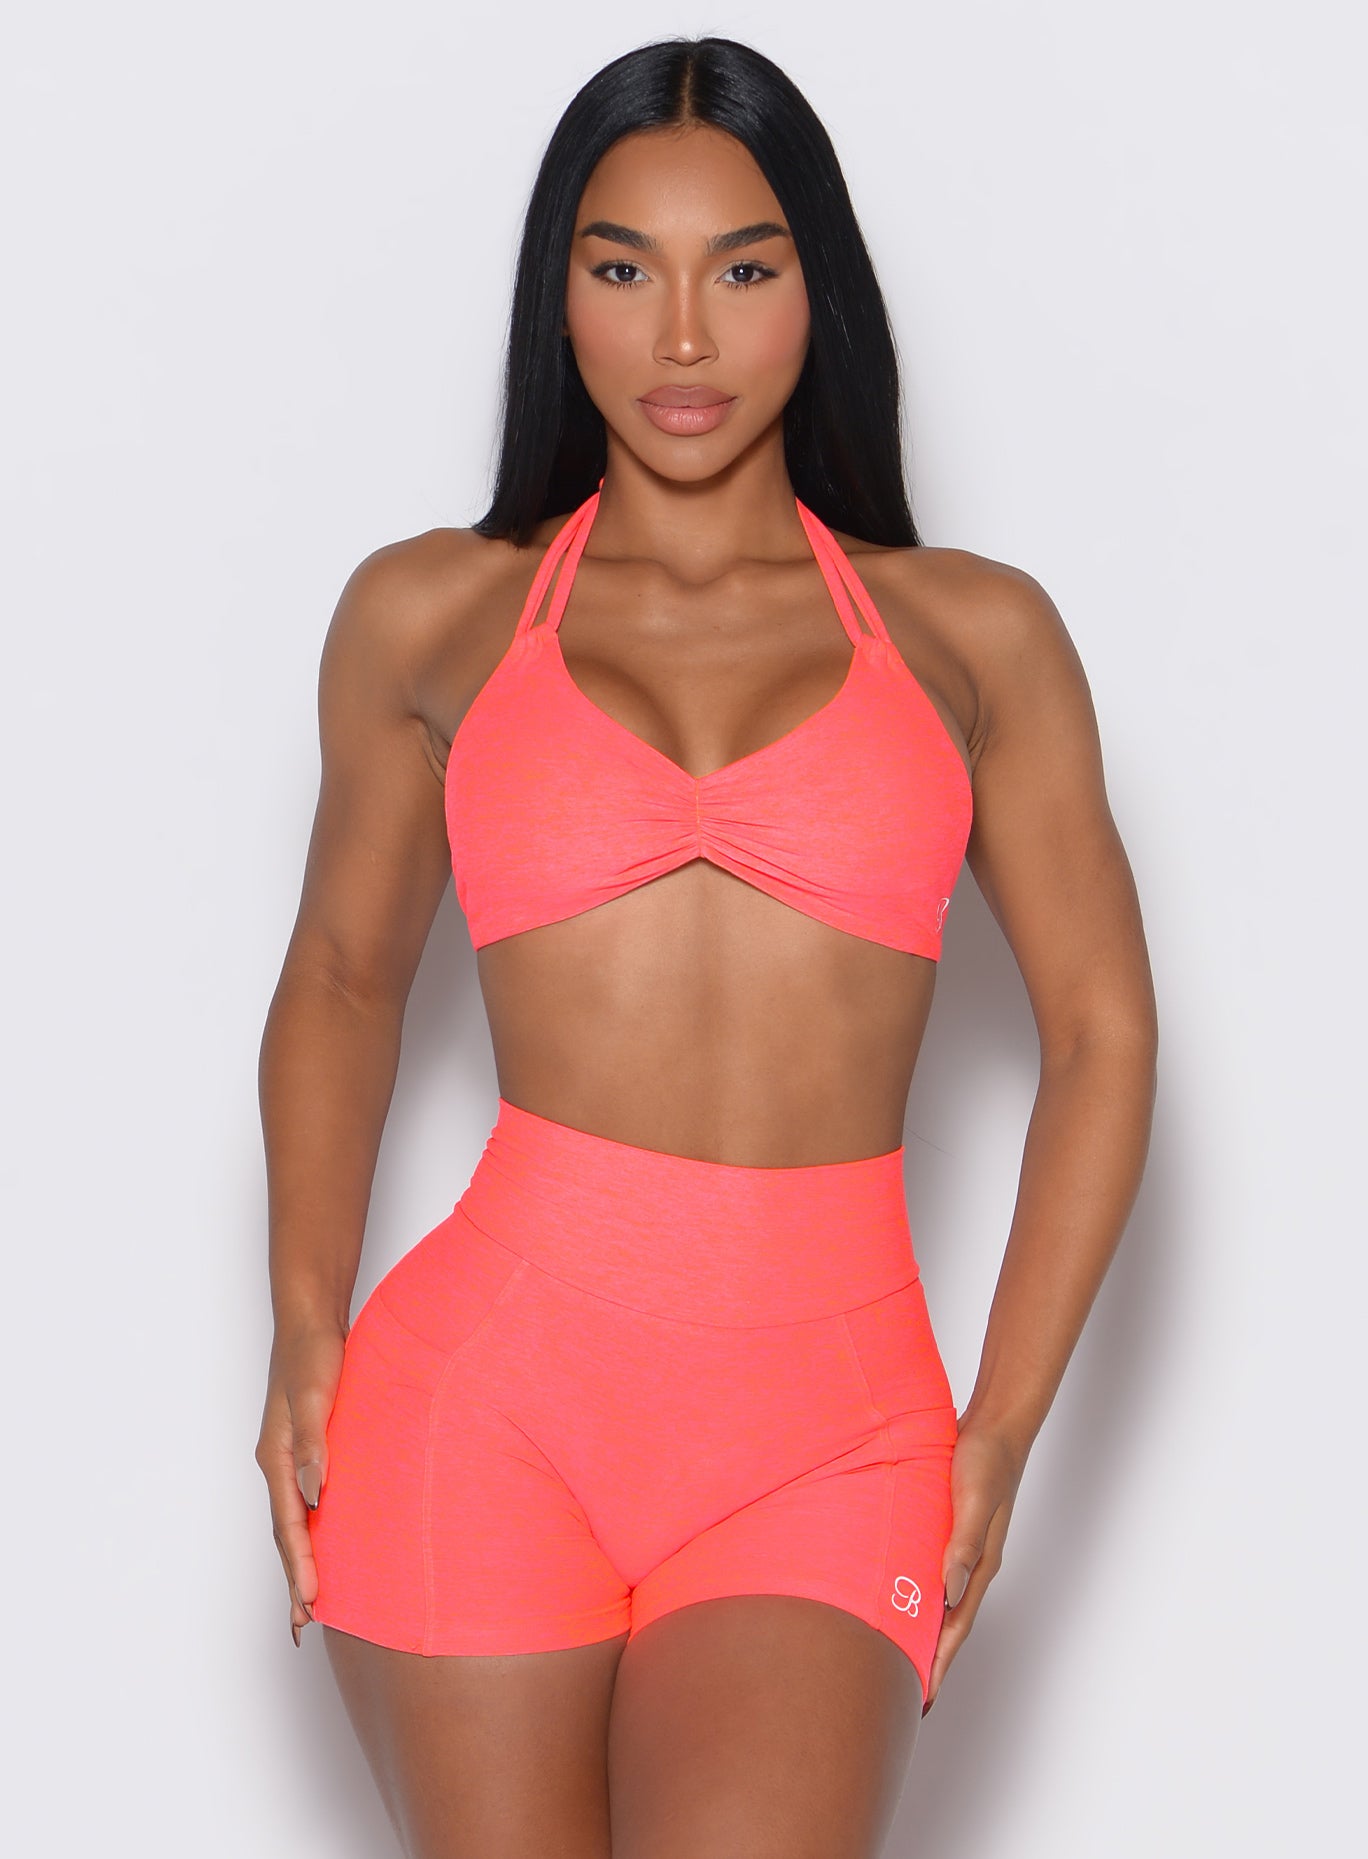 front profile view of a model wearing our butterfly sports bra in Neon Apricot Pink color along with the matching shorts 